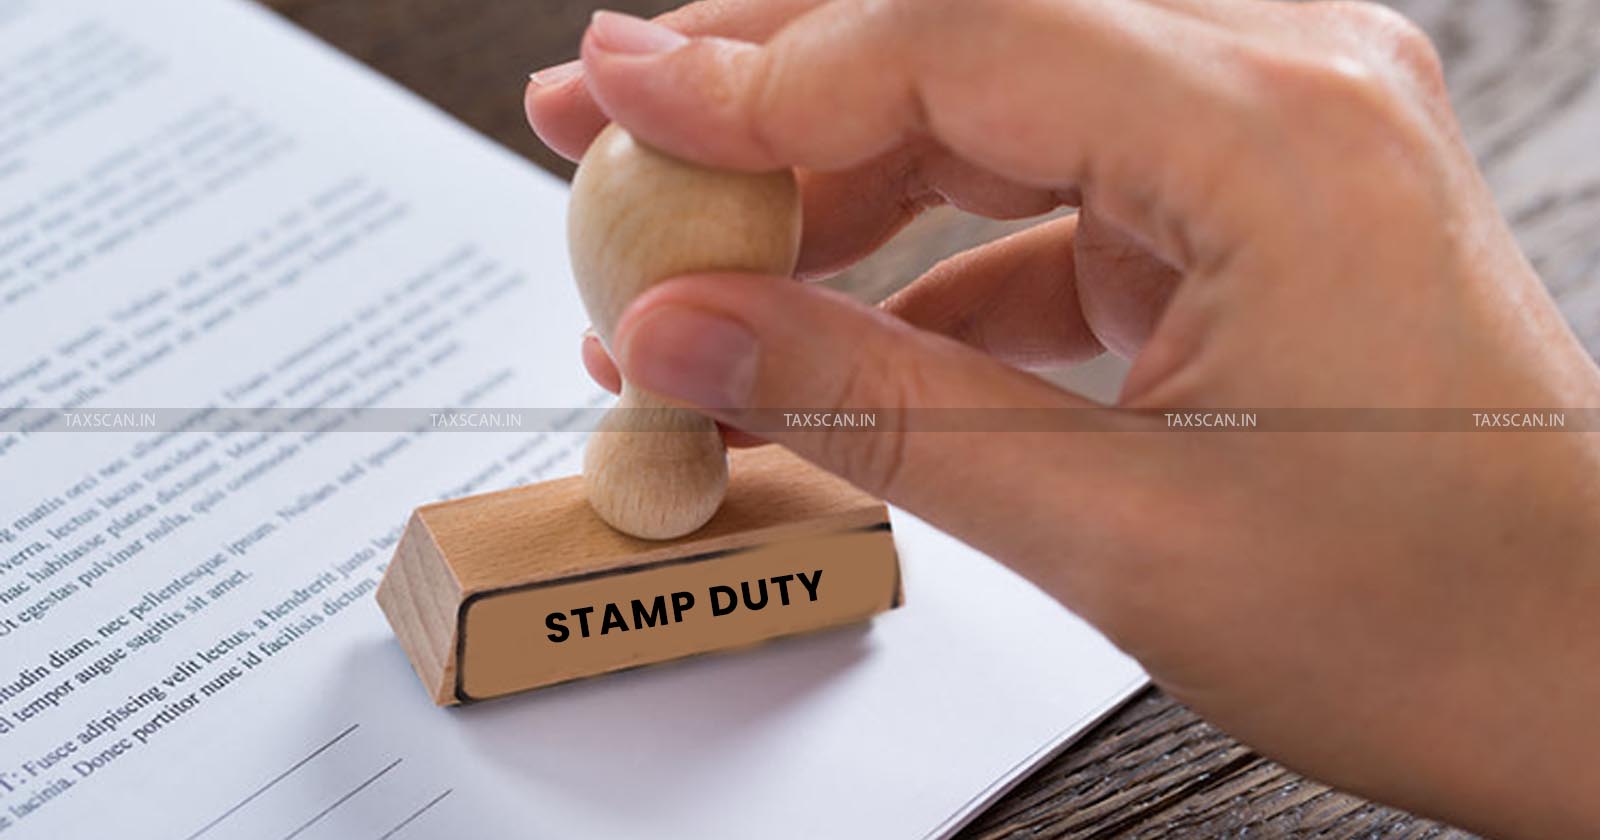 Delhi High Court - Stamp Duty - Writ Petition - Examining Issue of Stamp Duty - Arbitration - taxscan